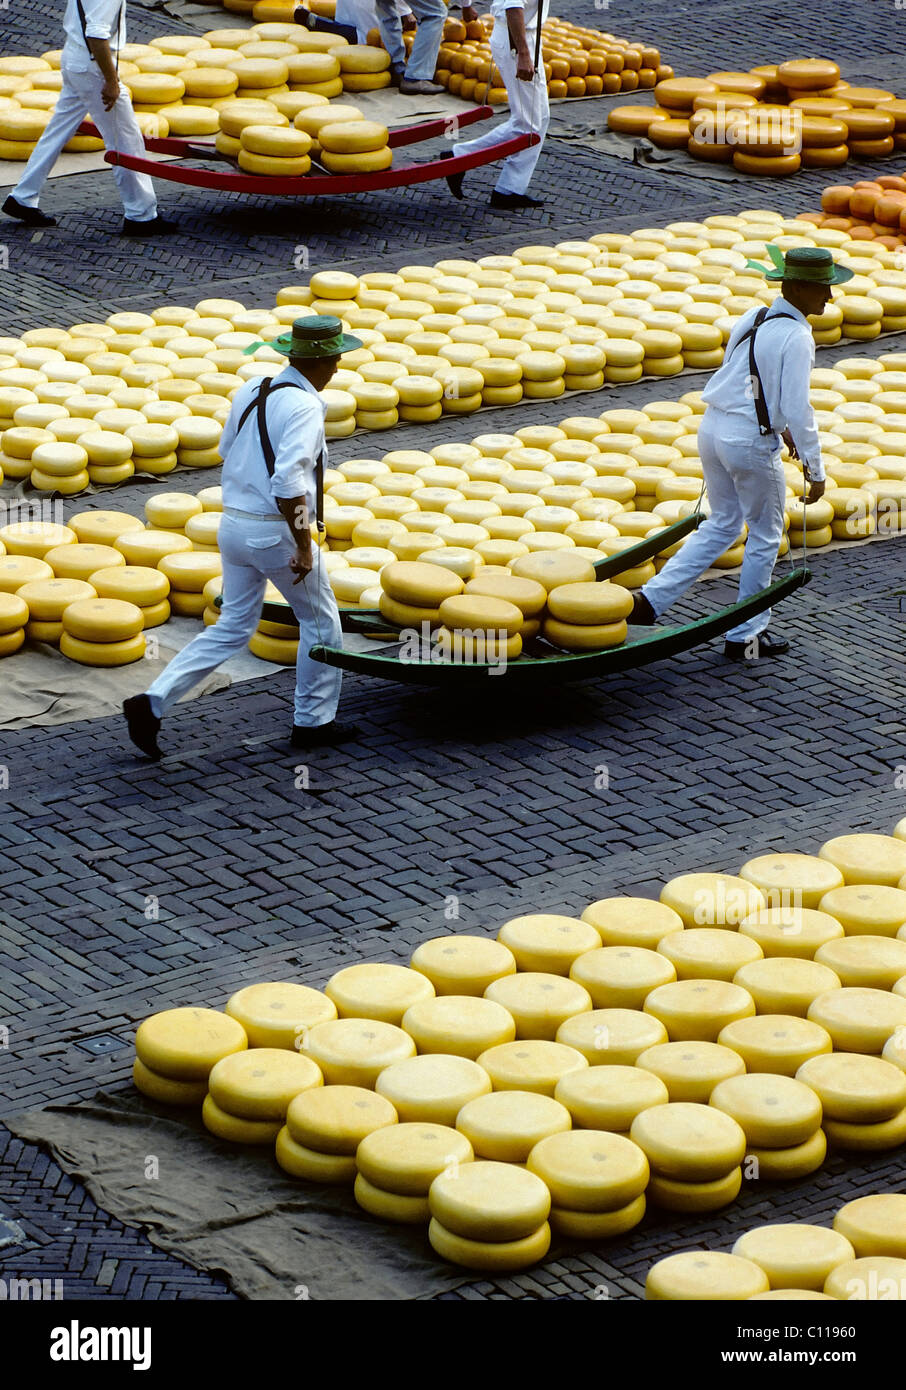 Two men carrying Gouda cheeses on a stretcher at a trot, traditional cheese market in Alkmaar, Holland, Netherlands, Europe Stock Photo